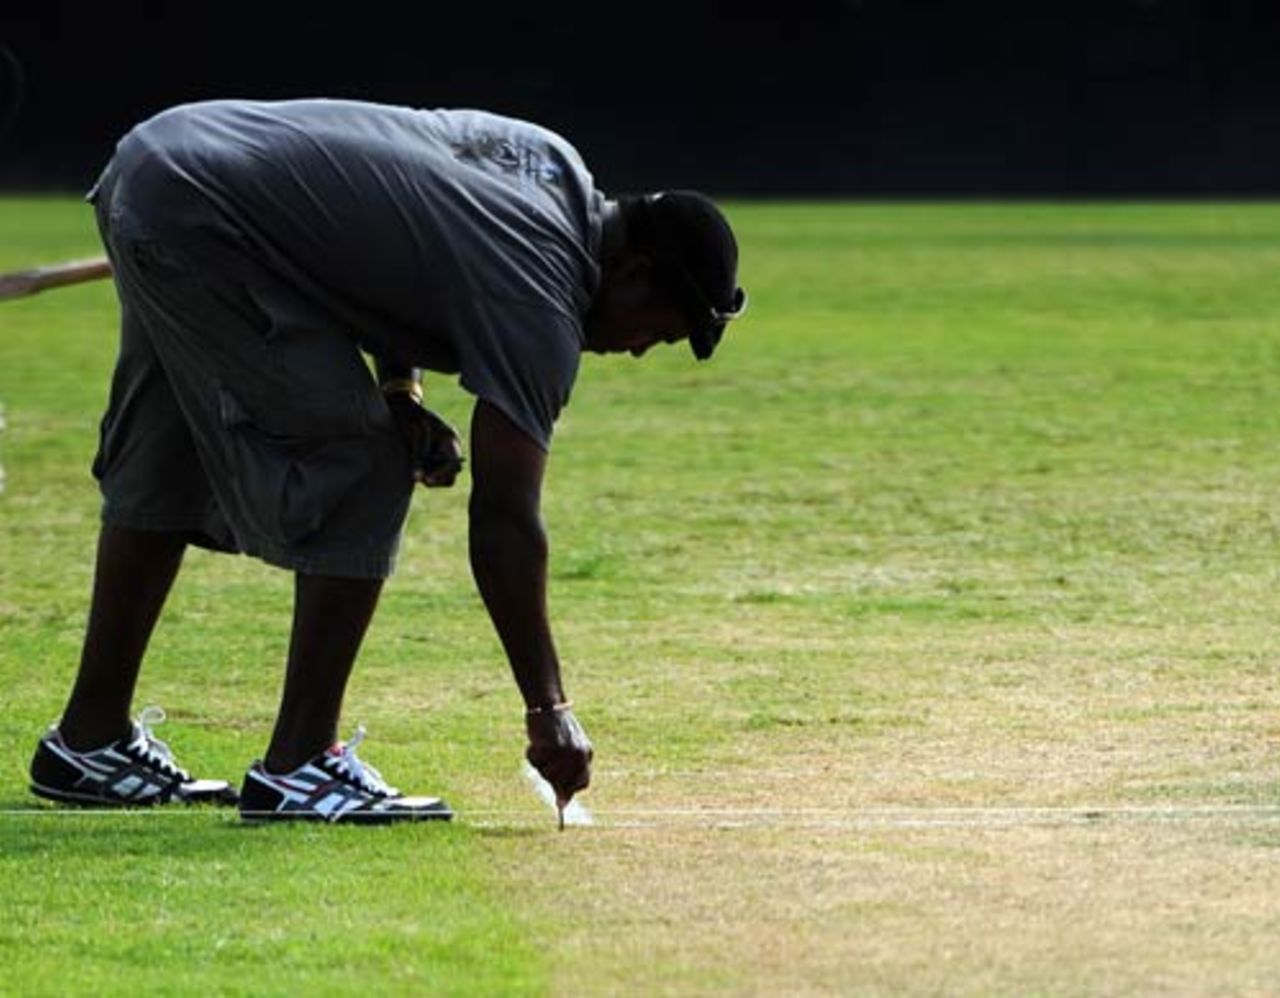 A groundsman marks the pitch as the Antigua Recreation Ground readies to host the third Test, West Indies v England, 2nd Test, St. John's, Antigua, February 13, 2009